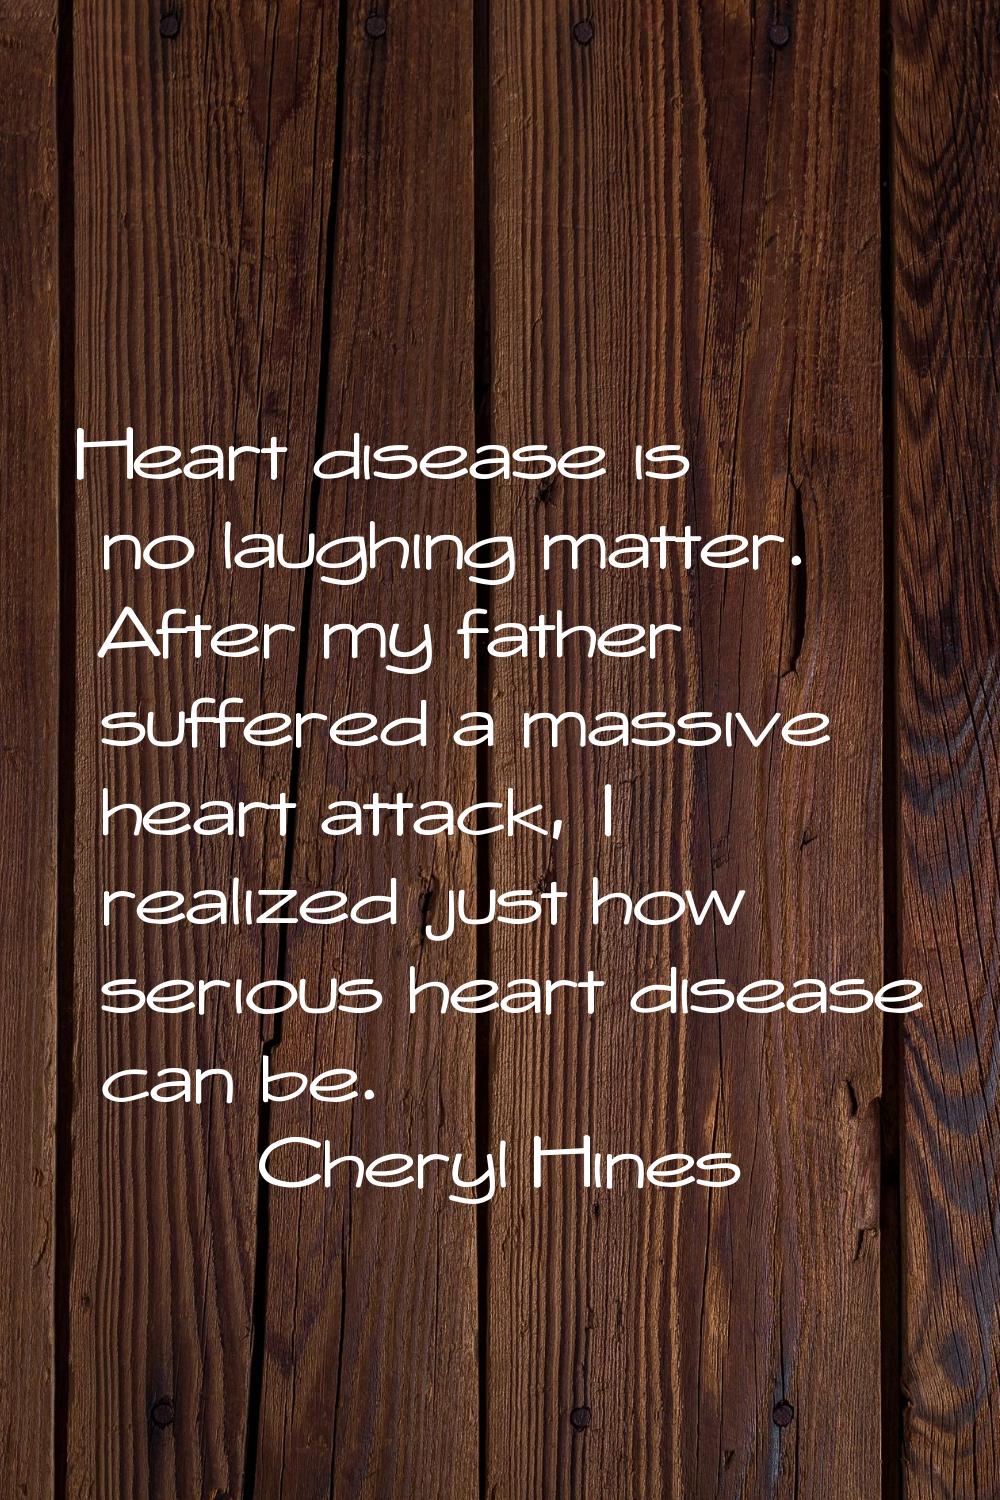 Heart disease is no laughing matter. After my father suffered a massive heart attack, I realized ju